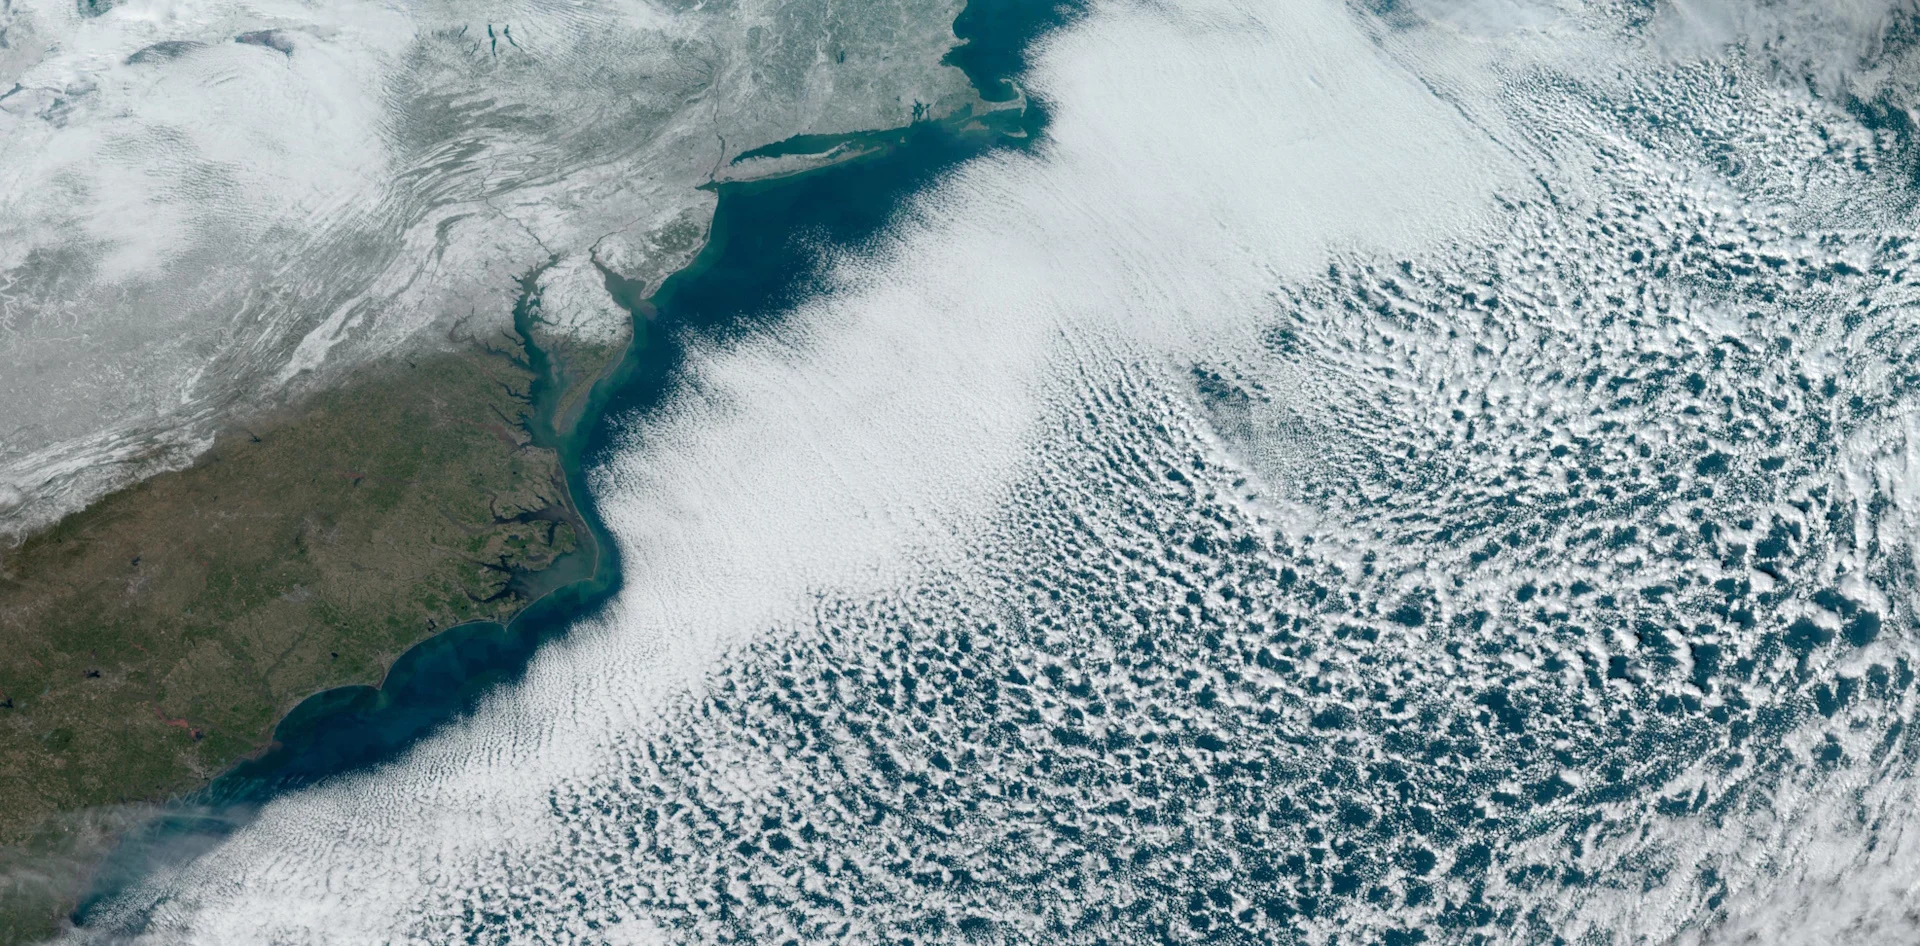 Watch as thousands of cloud streets billow over the Atlantic